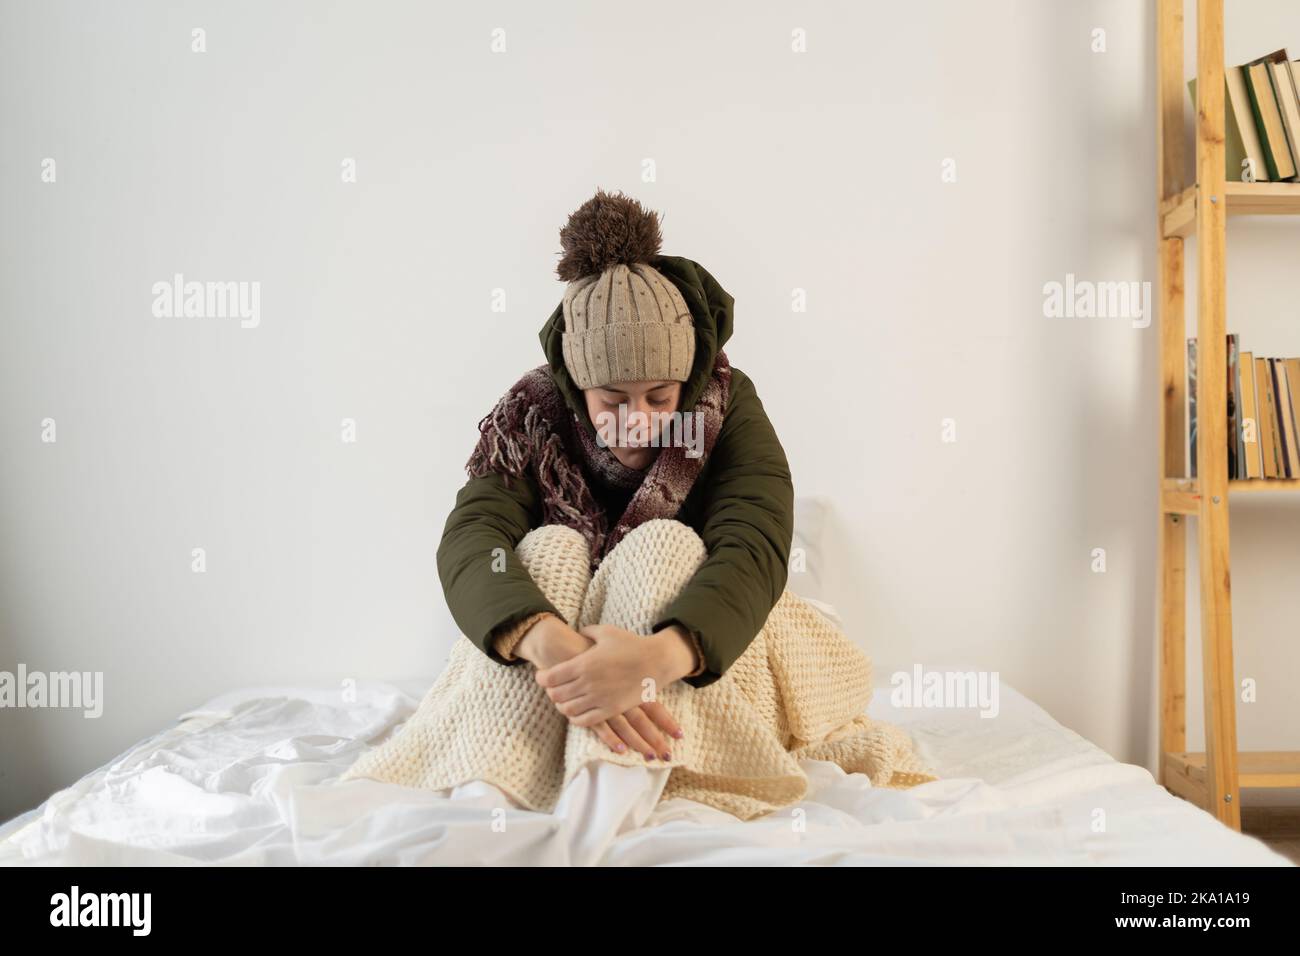 Angry young woman warmly dressed in a cold house sits on the bed feeling cold inside the house Stock Photo